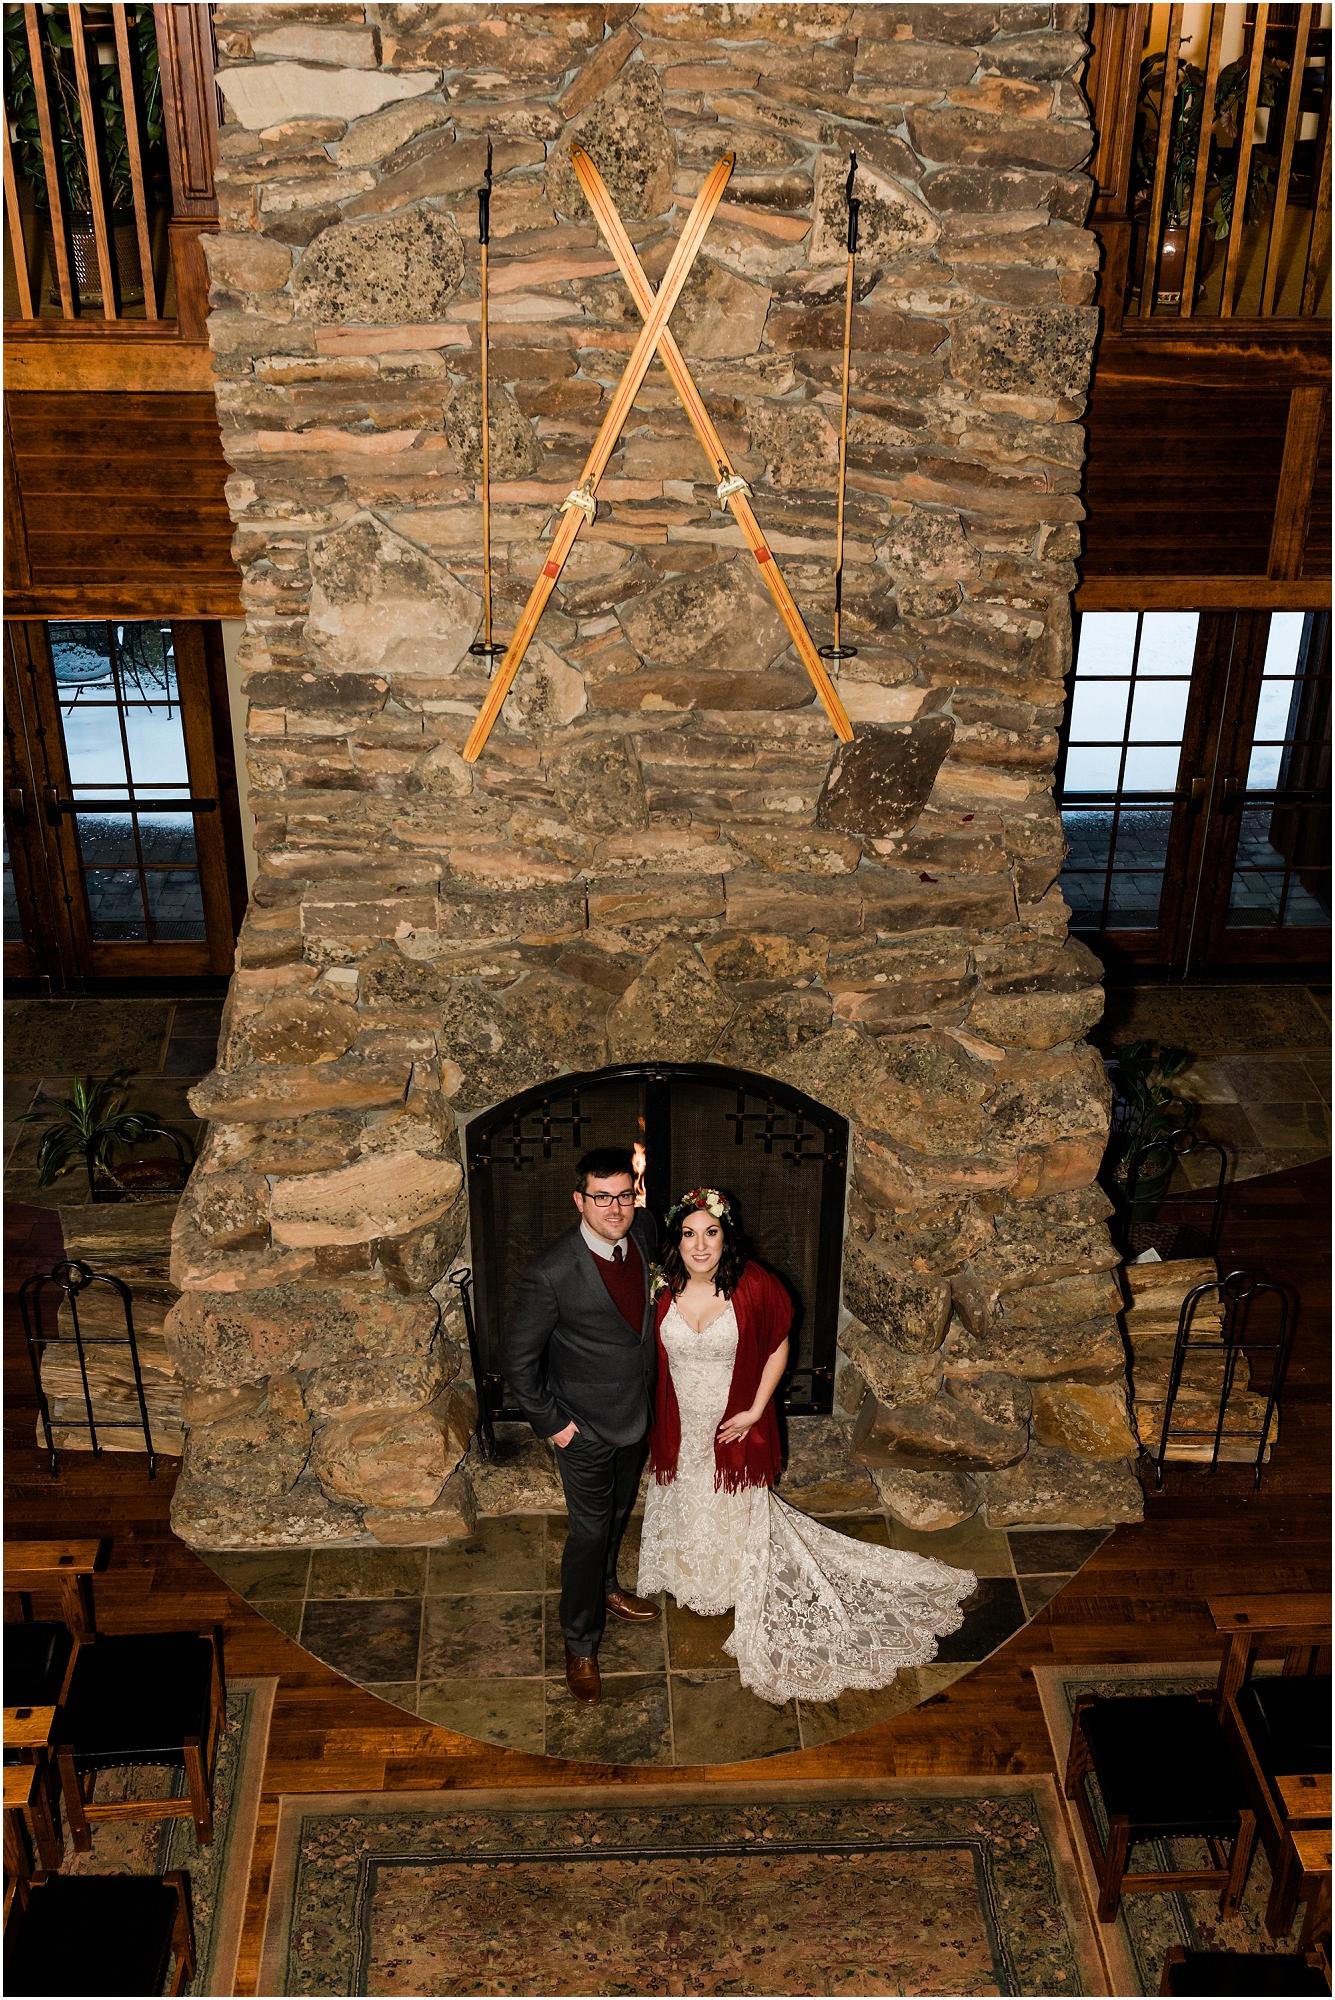 A wedding couple poses in front of the large stone fireplace decorated with wooden skis at their Central Oregon winter elopement at Five Pine Lodge in Sisters, OR. | Erica Swantek Photography